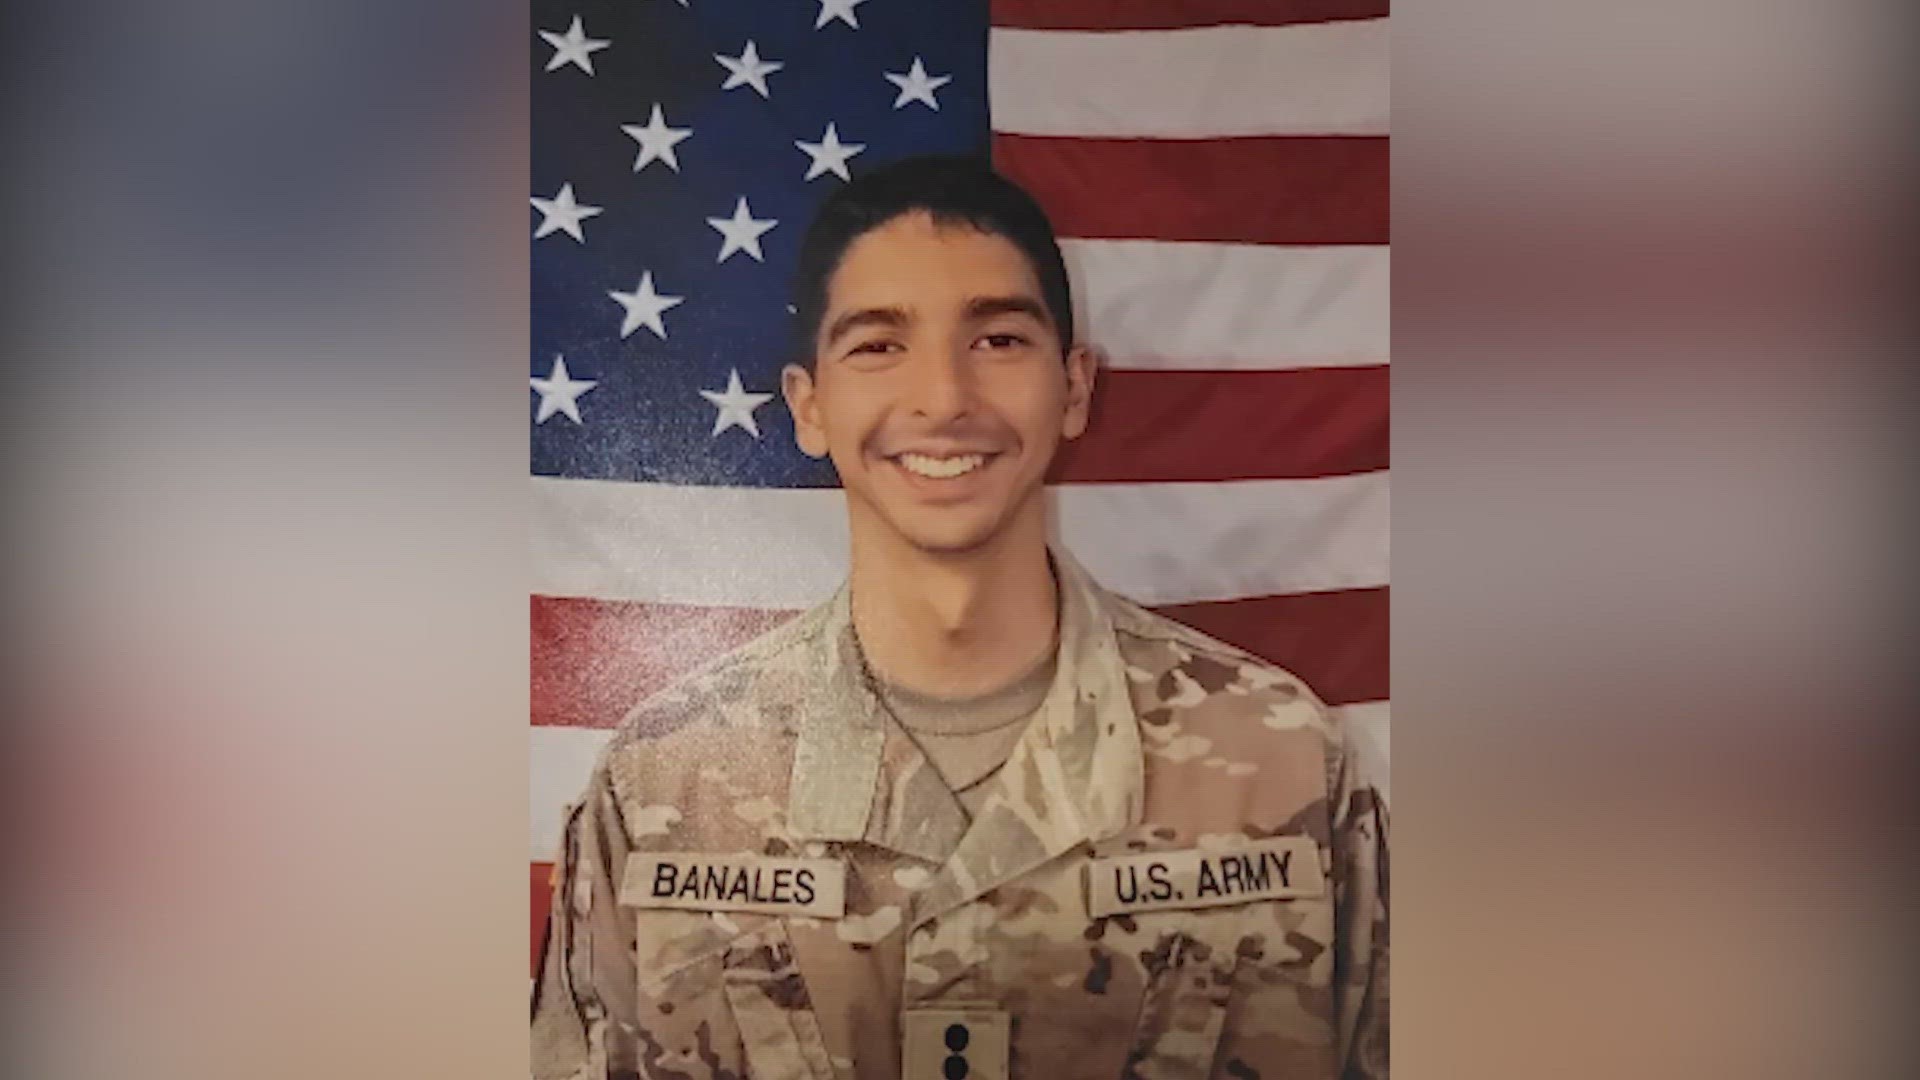 Police identified the victim as Joseph Banales. UIW confirmed that Banales was a junior nursing student who was also in the ROTC program.